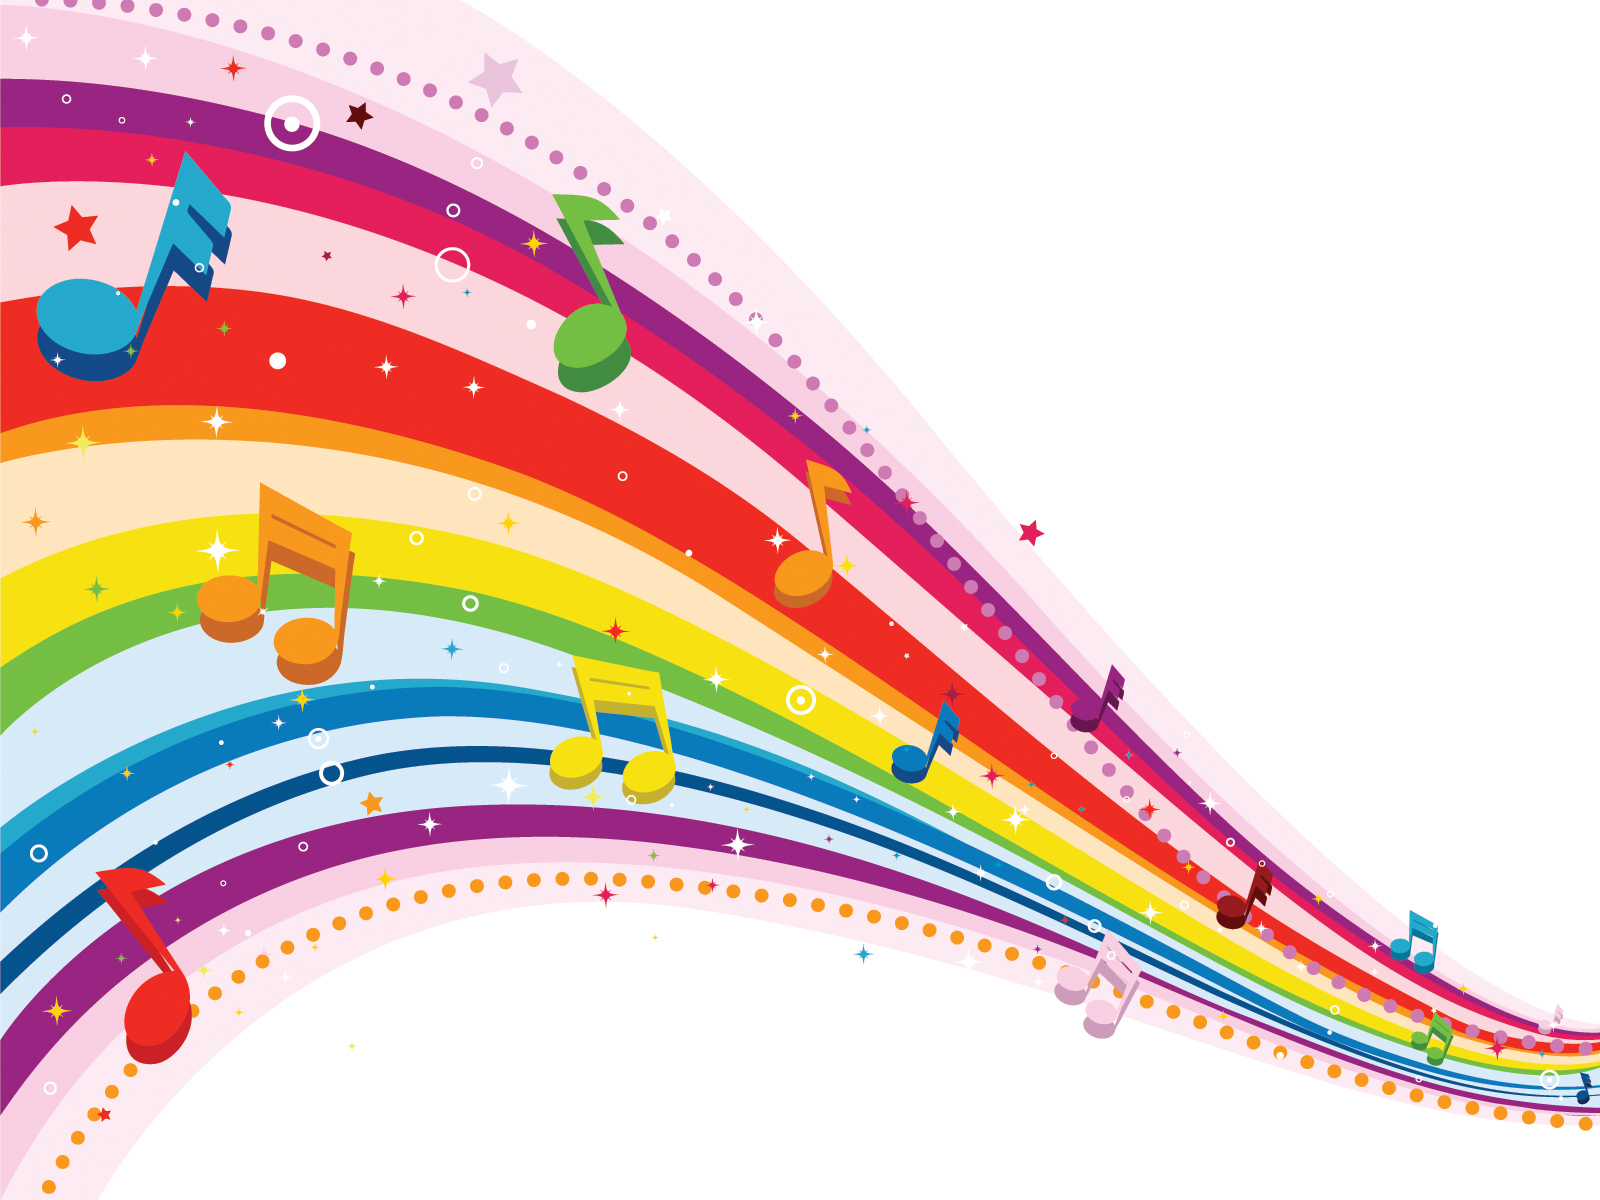 Sing of a Rainbow Powerpoint Templates - Fuchsia / Magenta, Music, Orange,  Red, Yellow - Free PPT Backgrounds and Templates